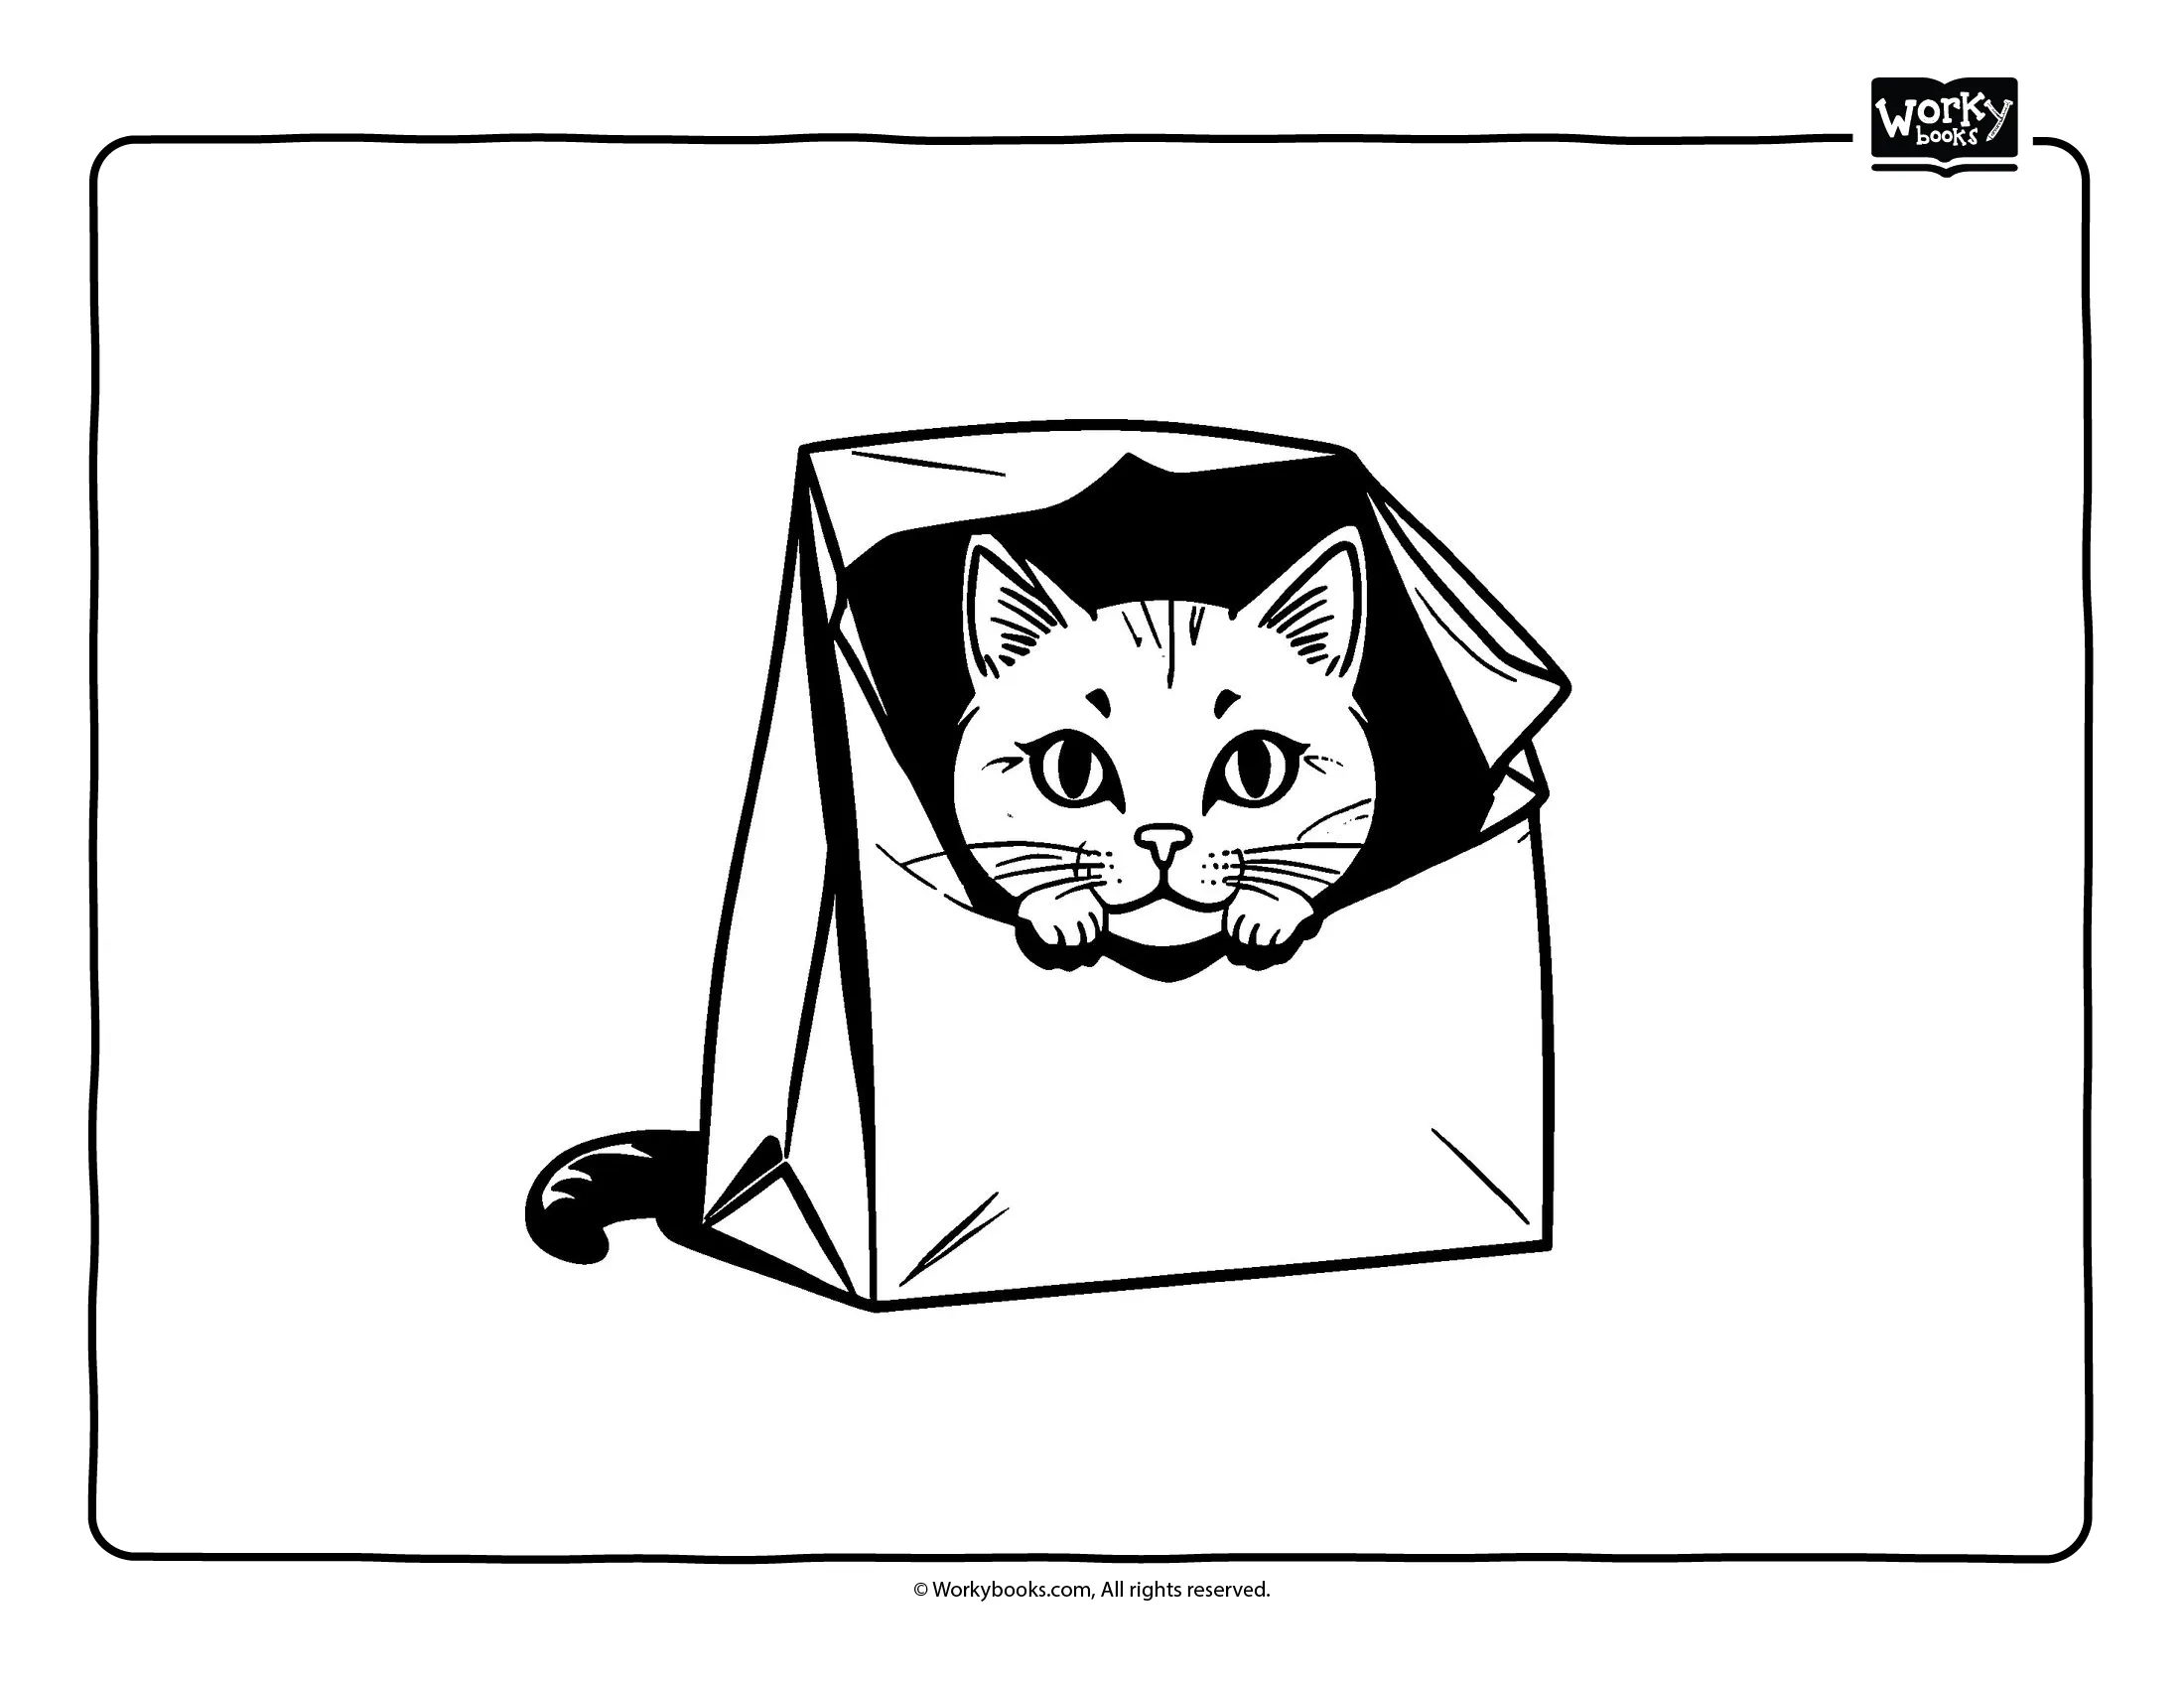 cat in bag coloring page